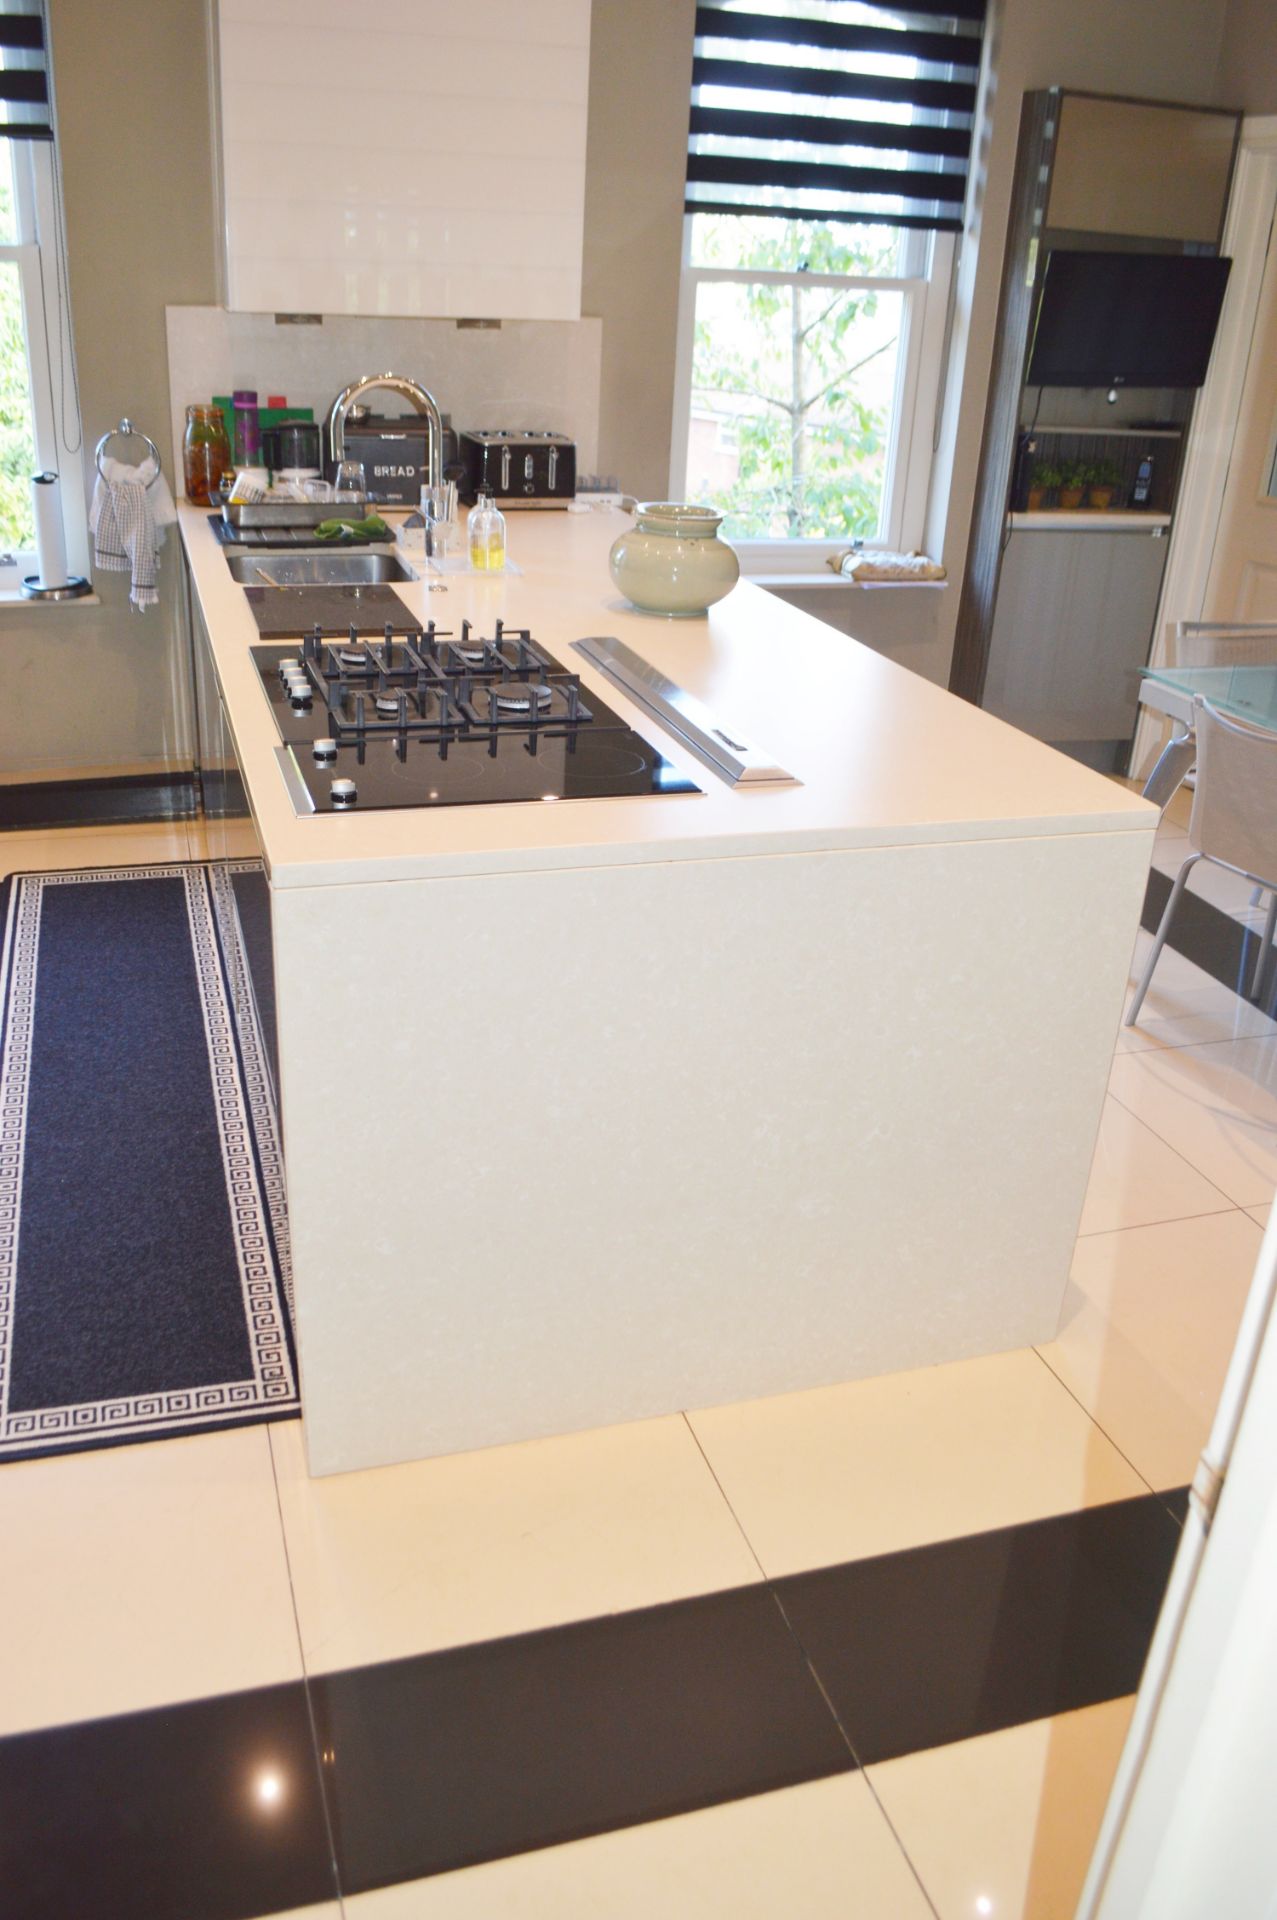 1 x Contemporary Bespoke Fitted Kitchen With Integrated Neff Branded Appliances To be removed from a - Image 34 of 37